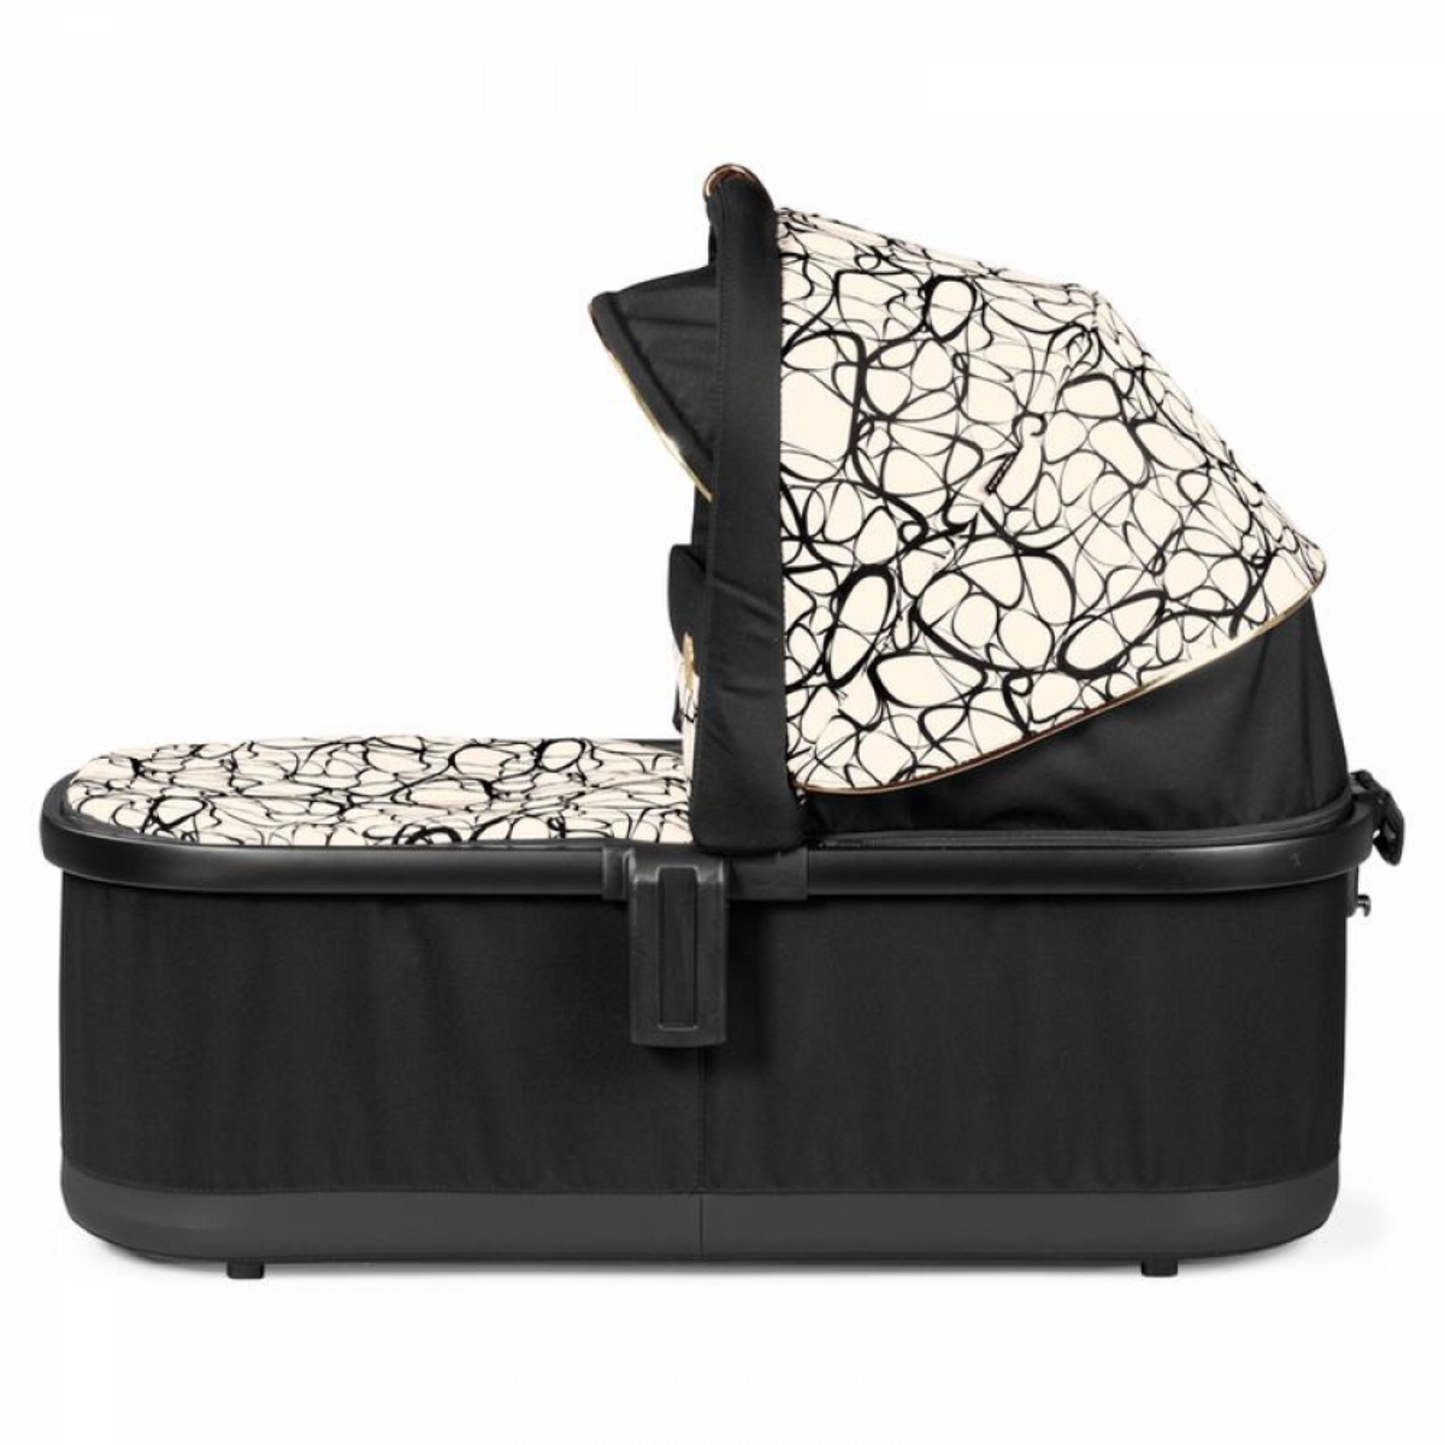 Peg Perego Ypsi Bassinet Carrycot - Graphic Gold